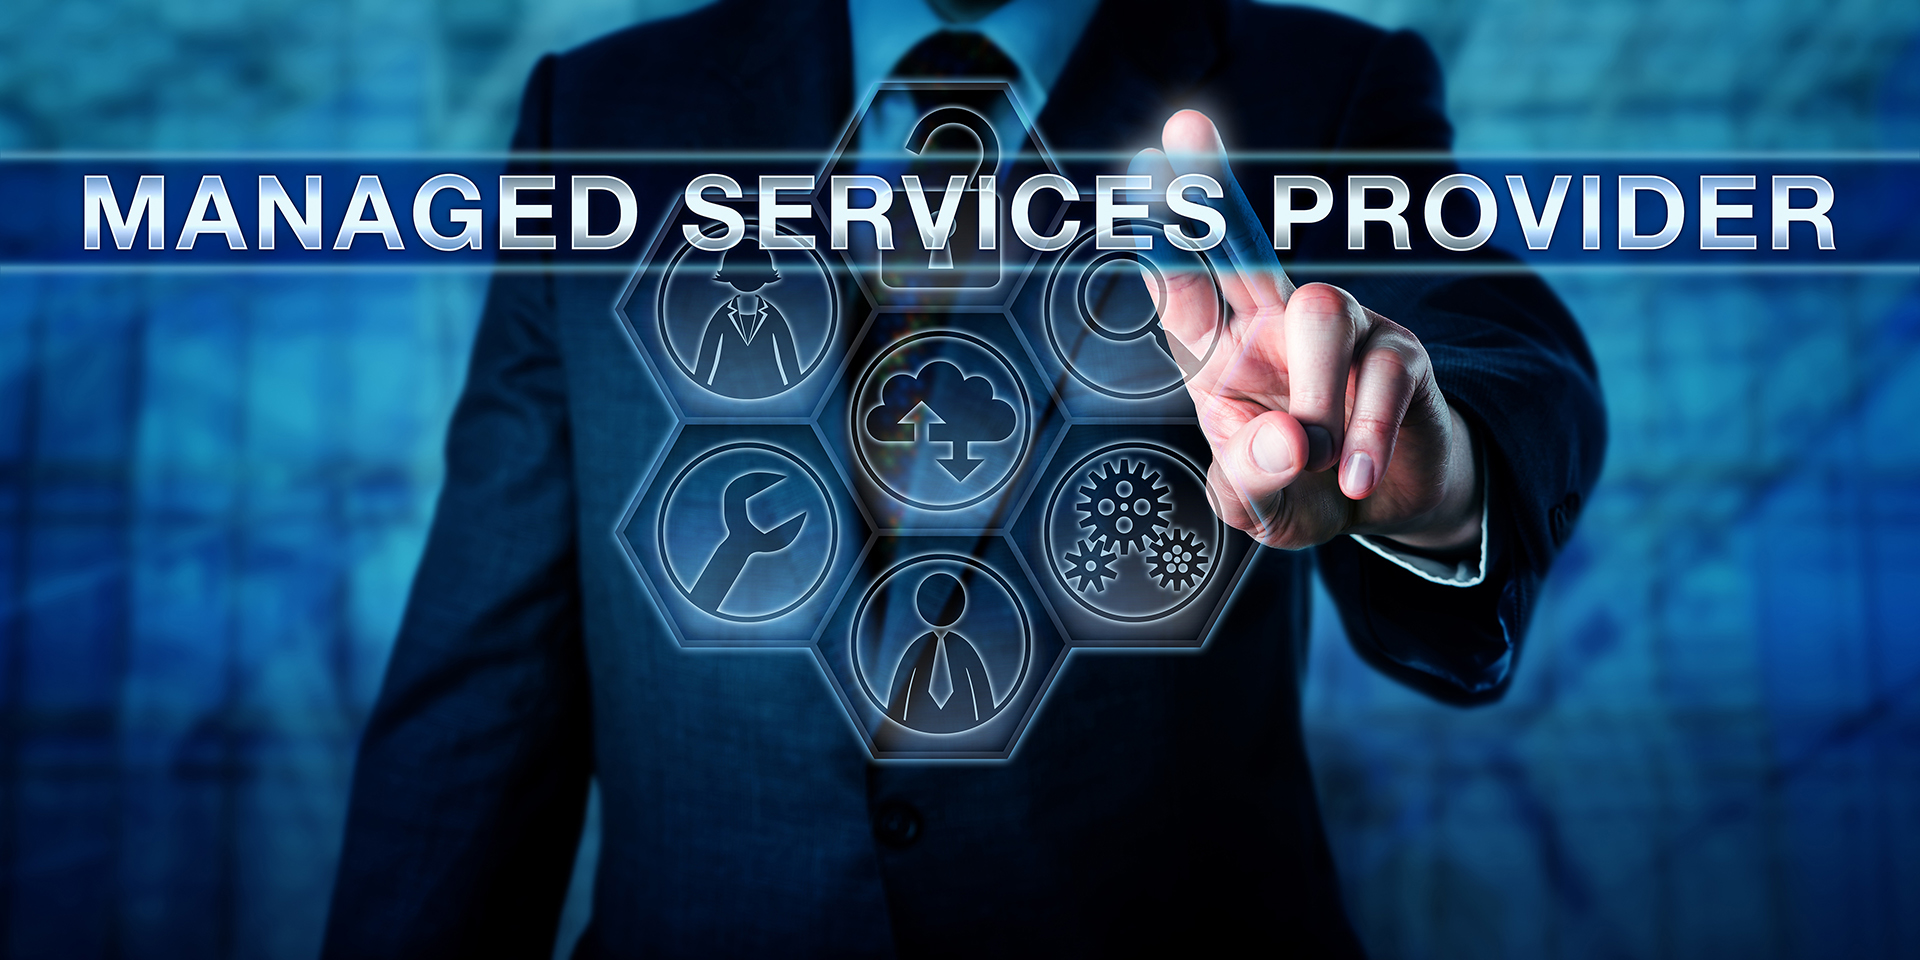 Managed Services Provider